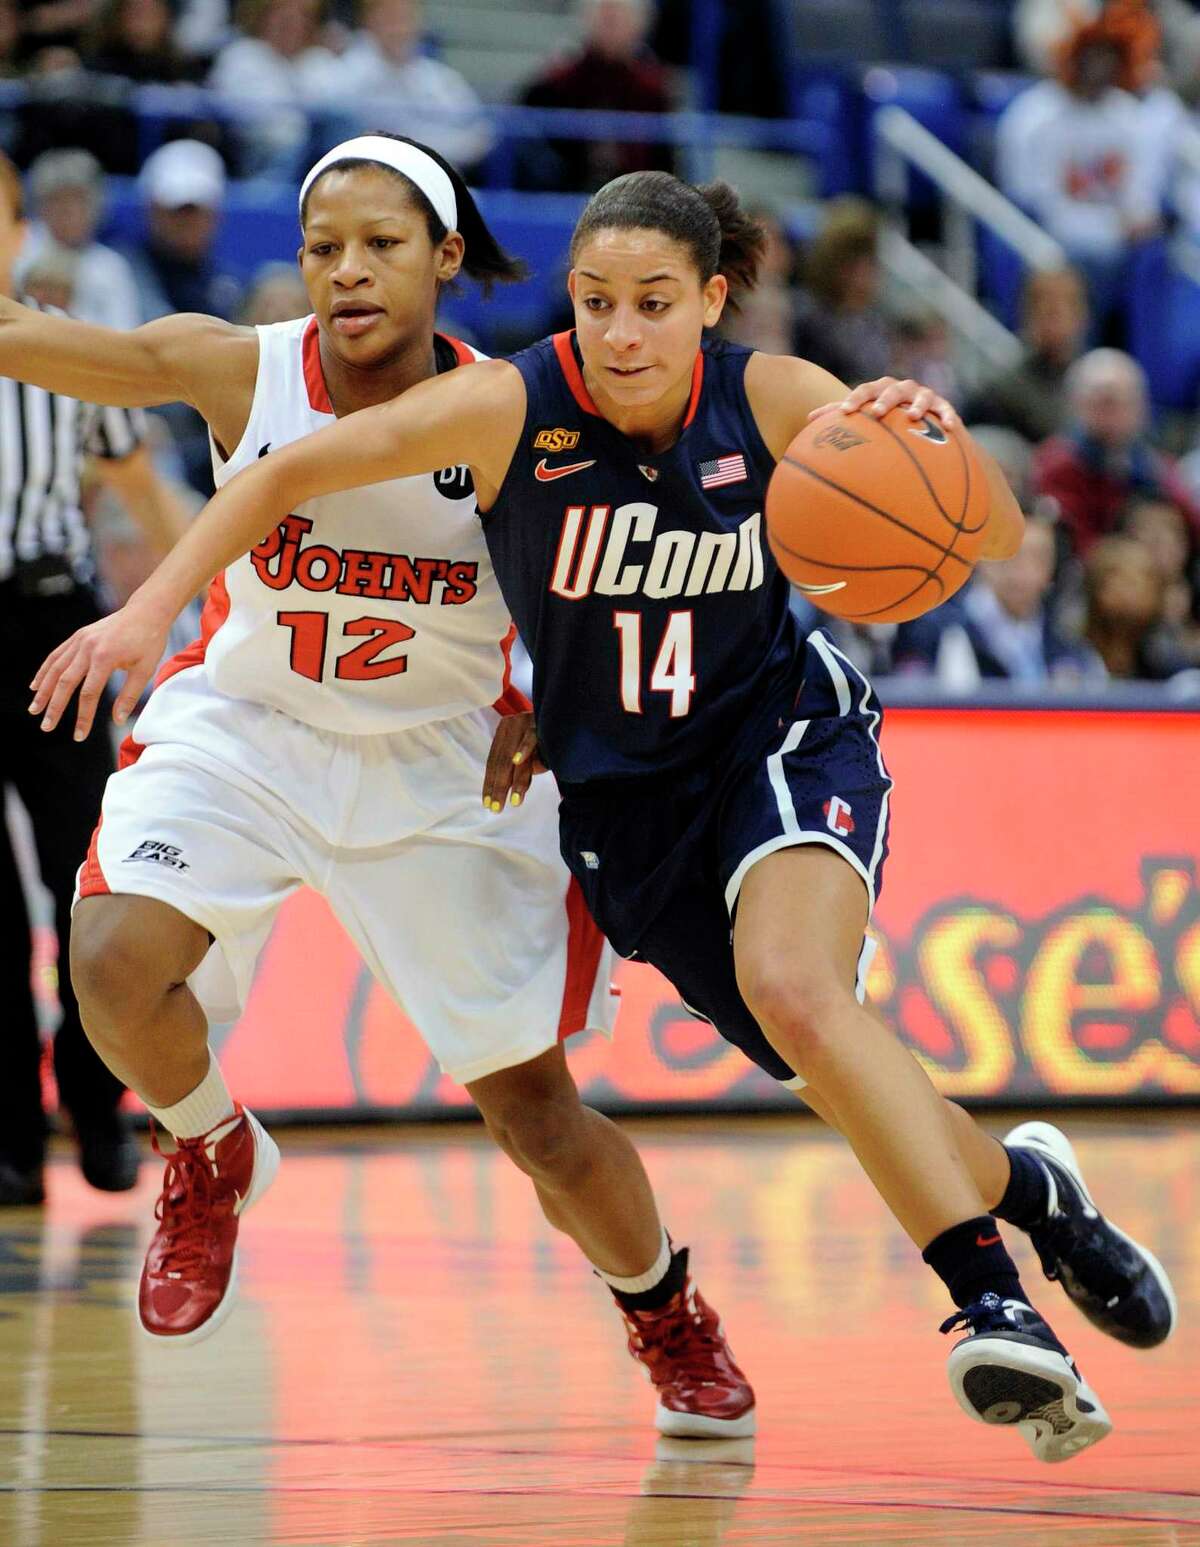 Connecticut's Bria Hartley, right, drives past St. John's Briana Brown during the first half Connecticut's 74-43 victory in an NCAA college basketball game in the semifinals of the Big East women's tournament in Hartford, Conn., Monday, March 5, 2012. (AP Photo/Fred Beckham)